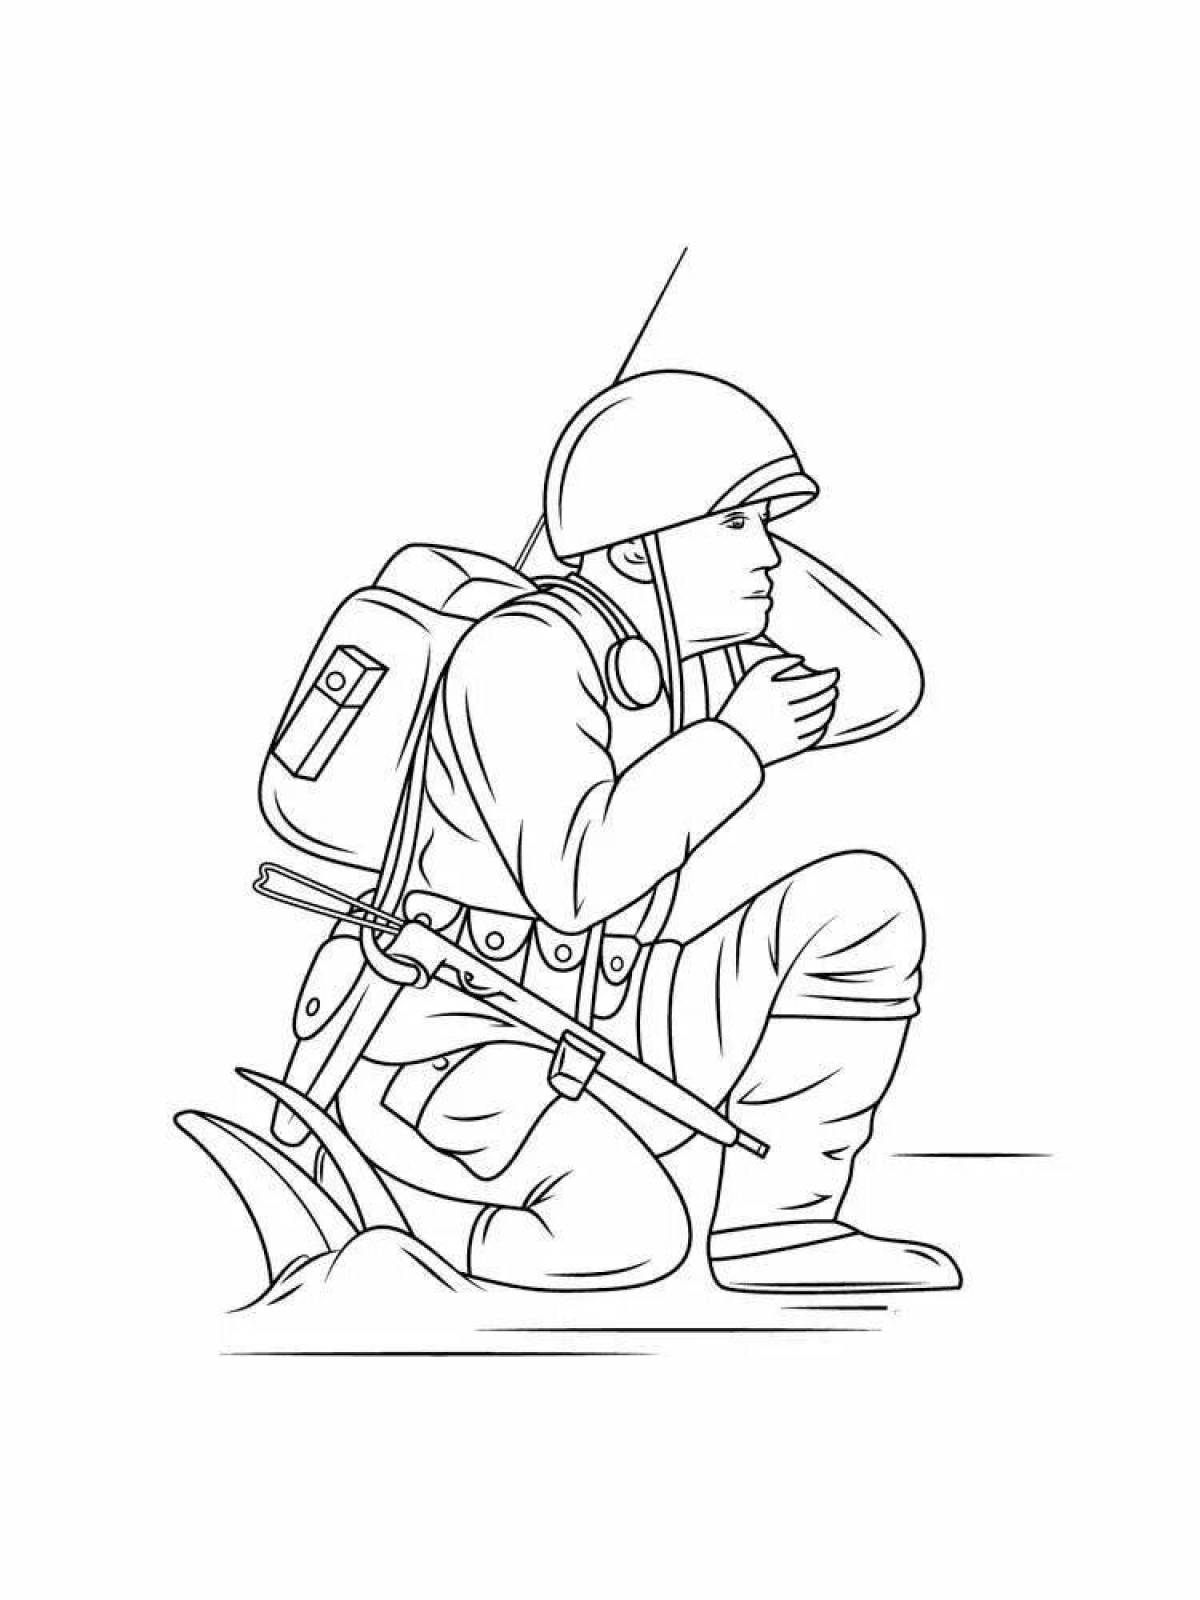 Coloring book brave Russian soldier